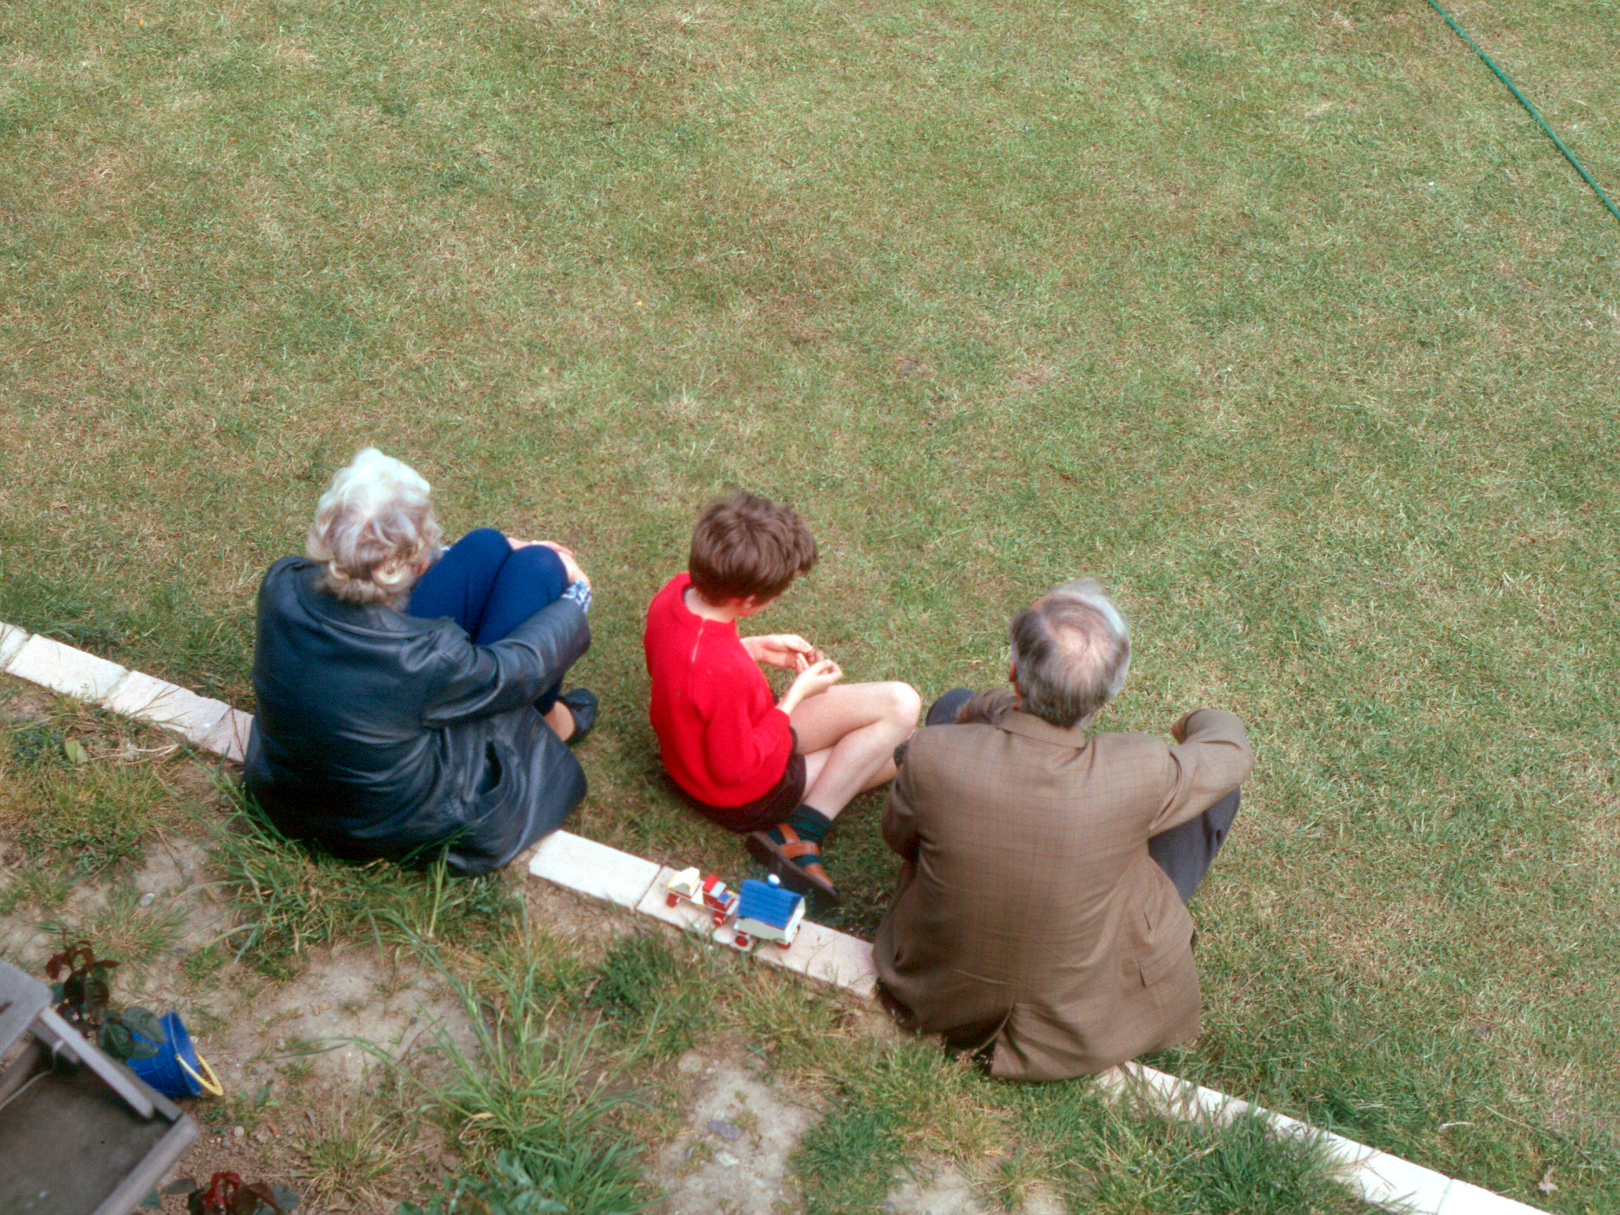 7203108k May 1972 - Mum, Dad and Simon sitting on the edge of the garden path in Croydon